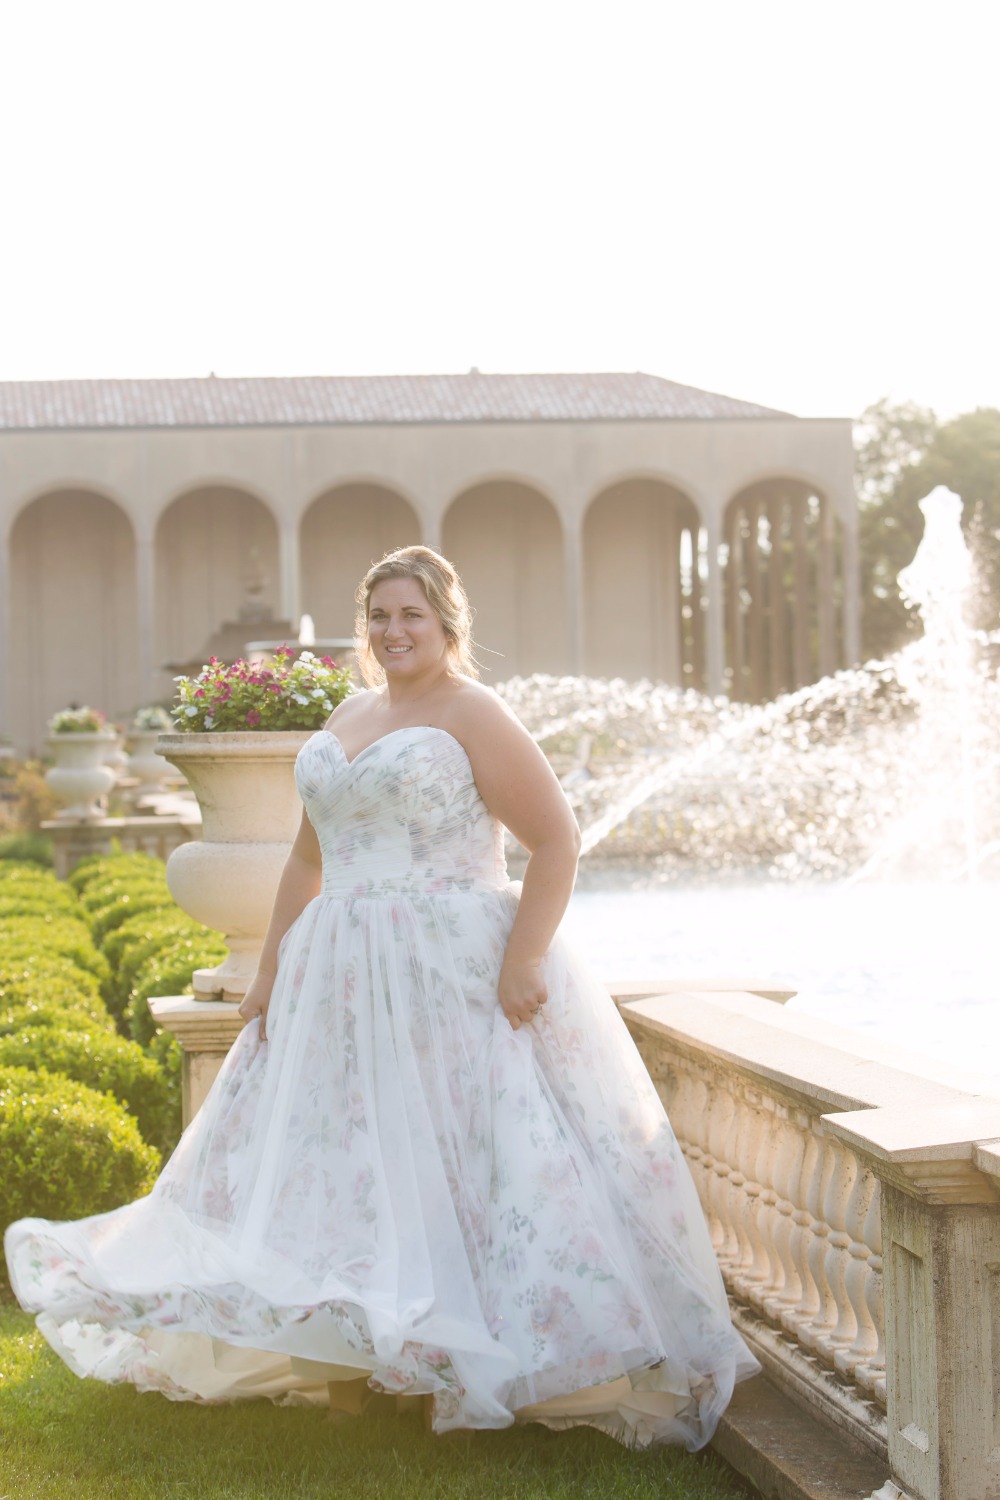 to-all-our-curvy-brides-this-is-a